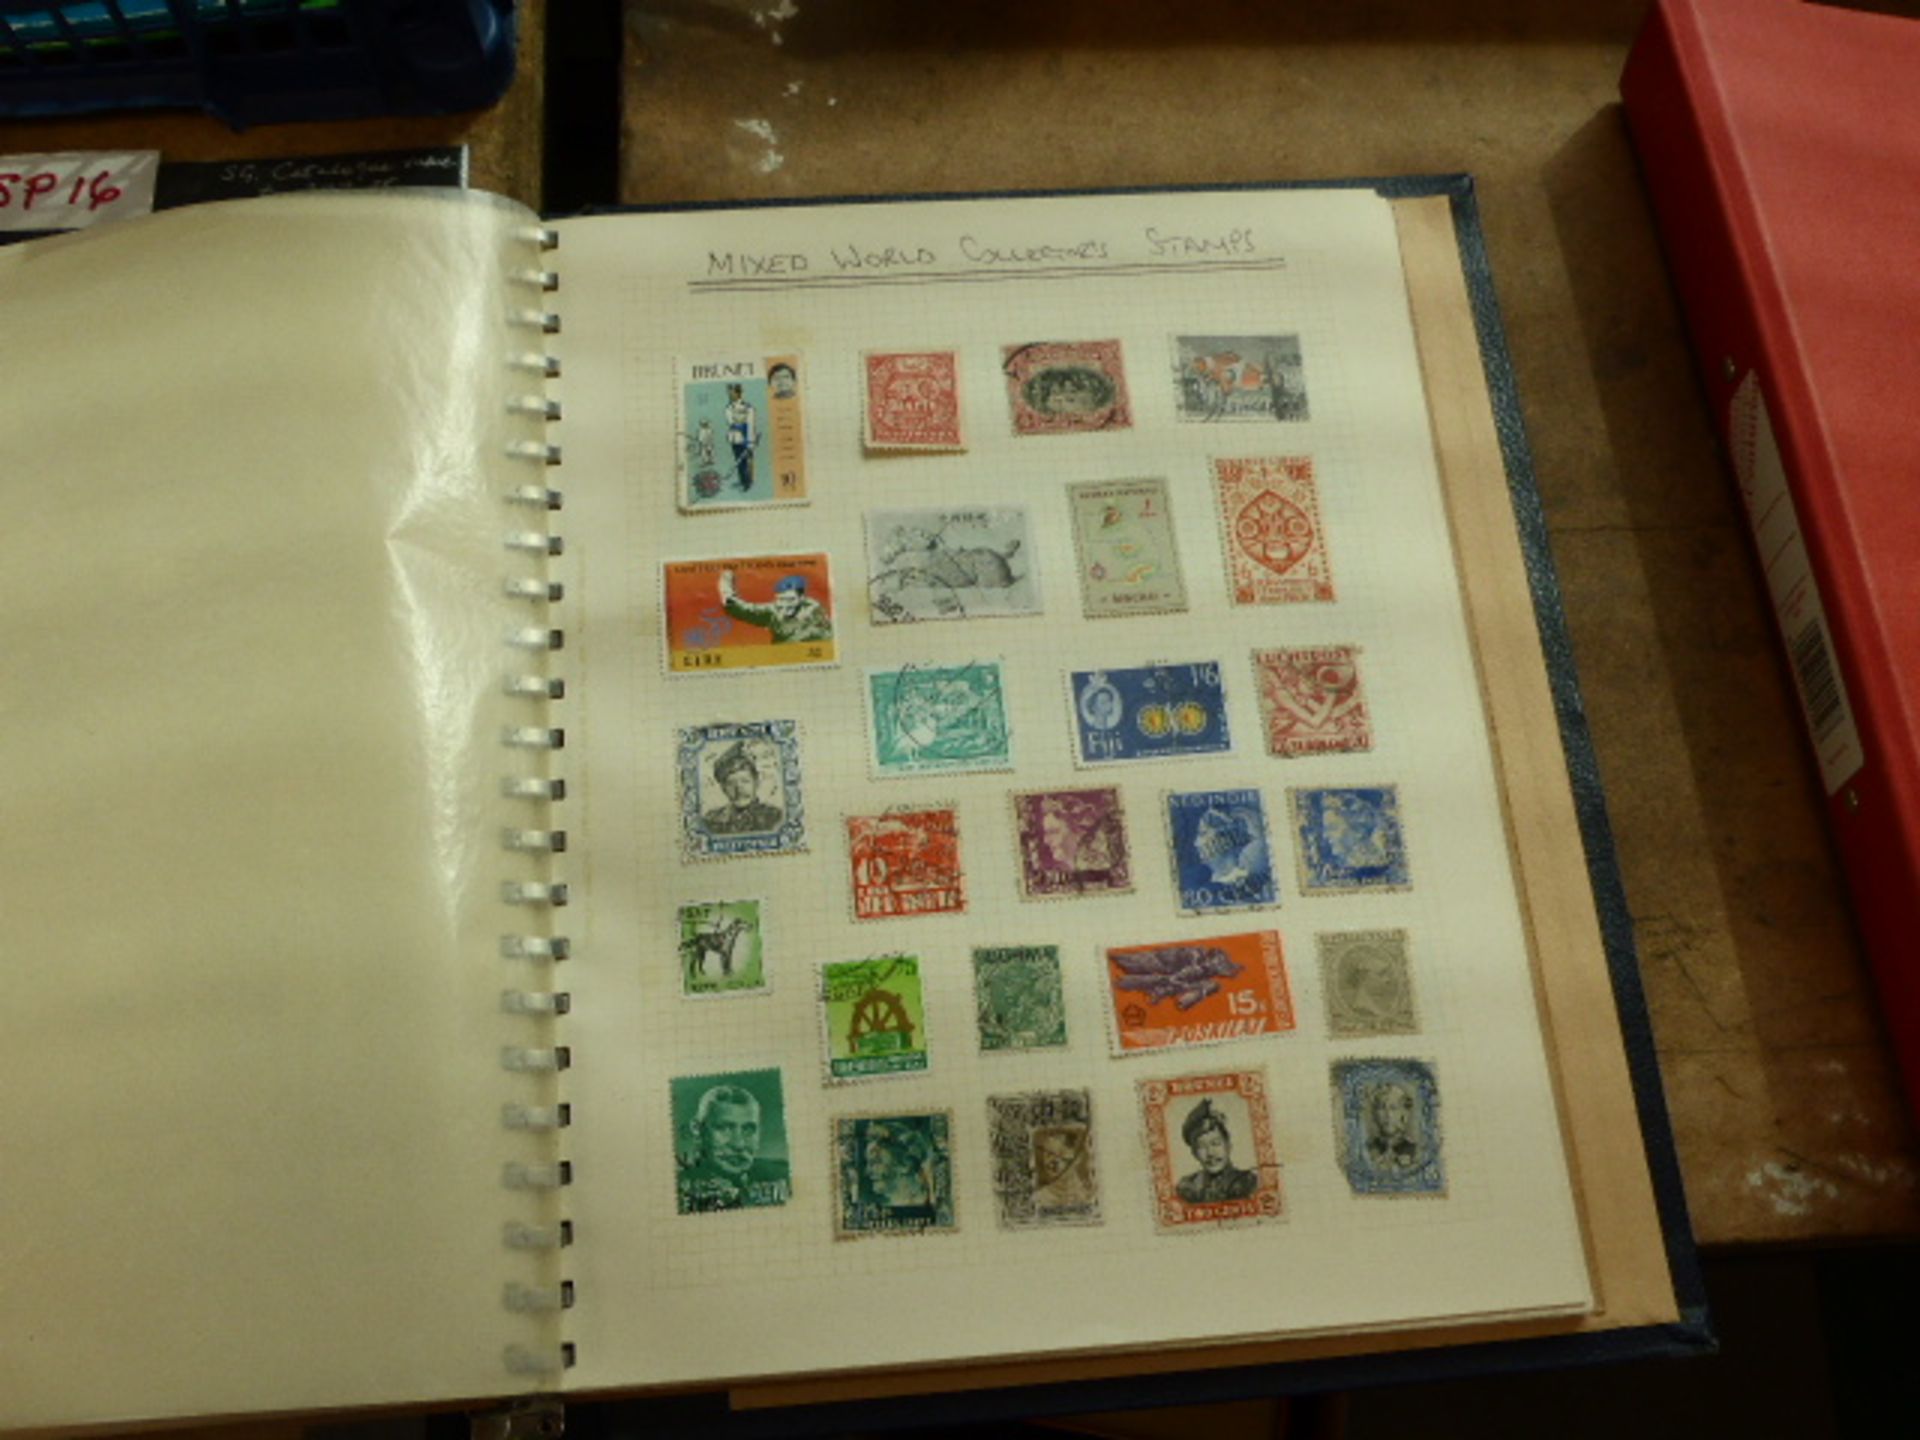 2455 World collector's stamps from mixed regions incl. France, Early British, Malta, etc.